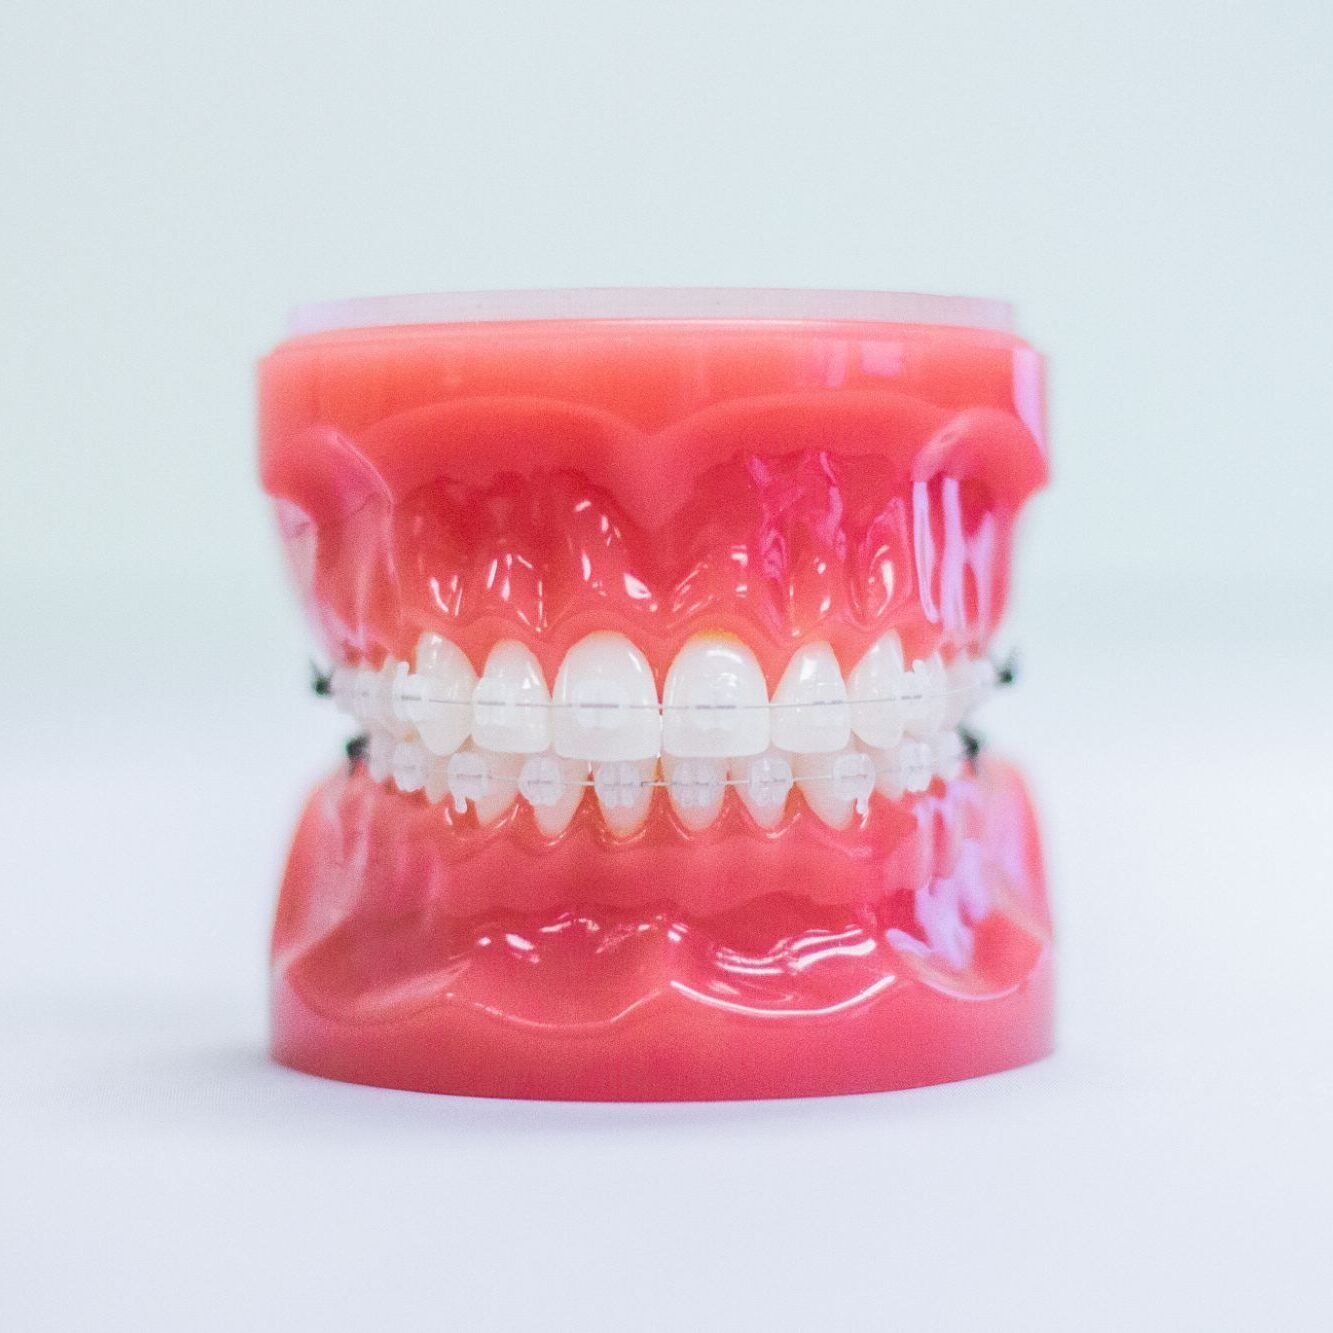 a model of a person 's teeth with braces on them